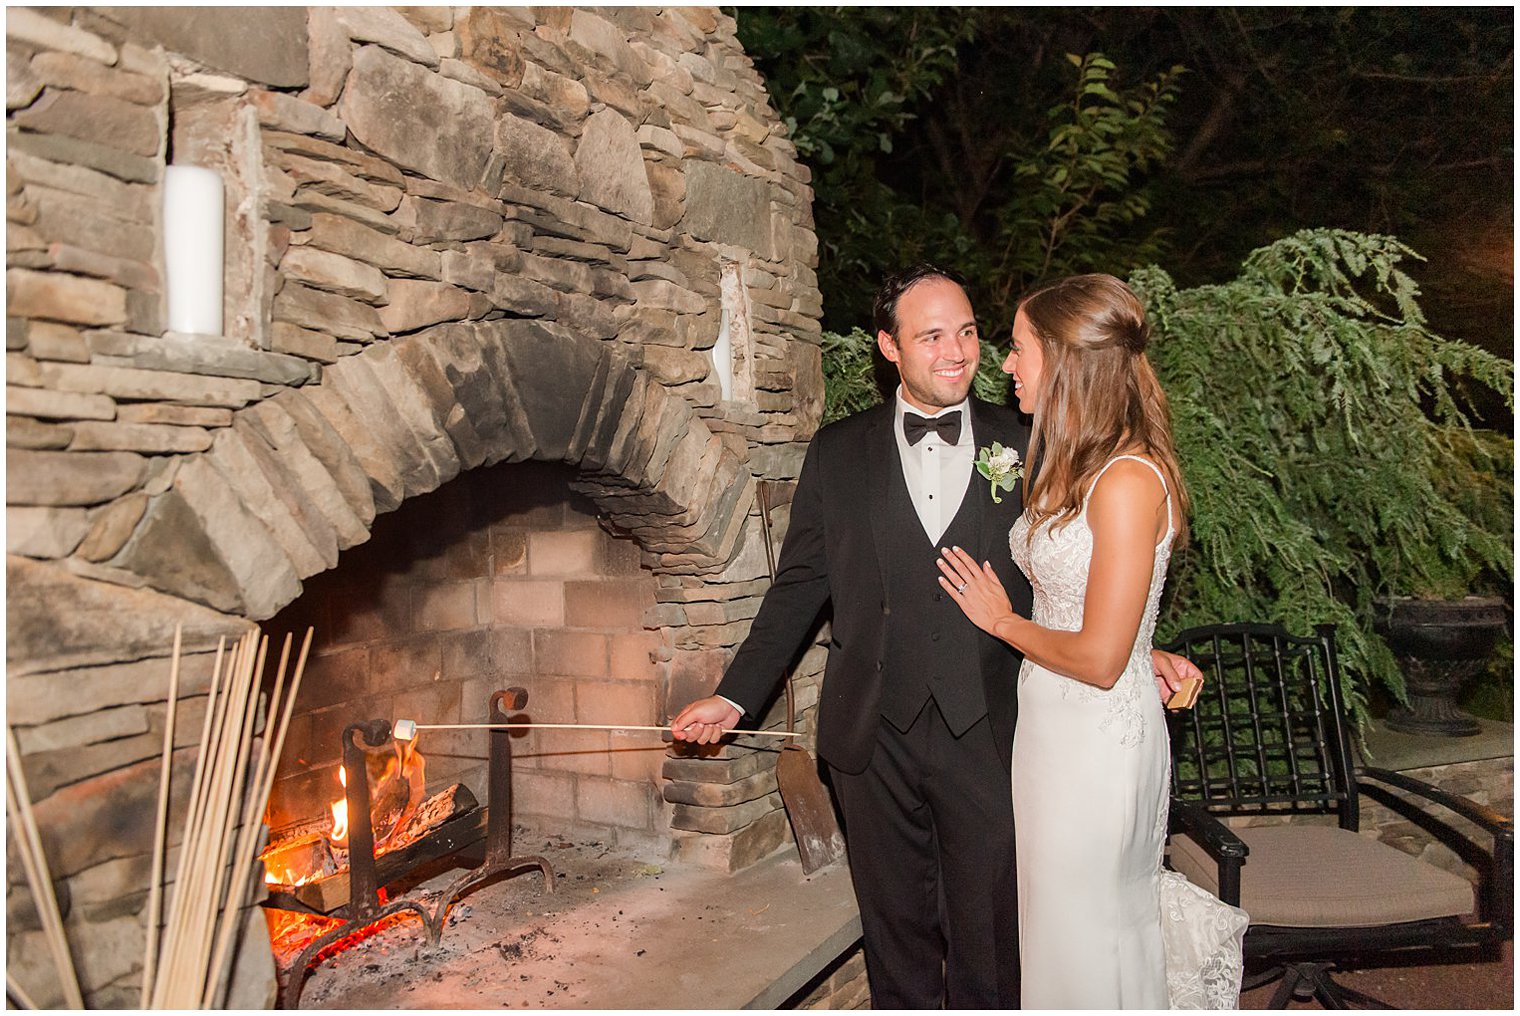 newlyweds roast marshmallows in stone over at the Inn at Fernbrook Farms